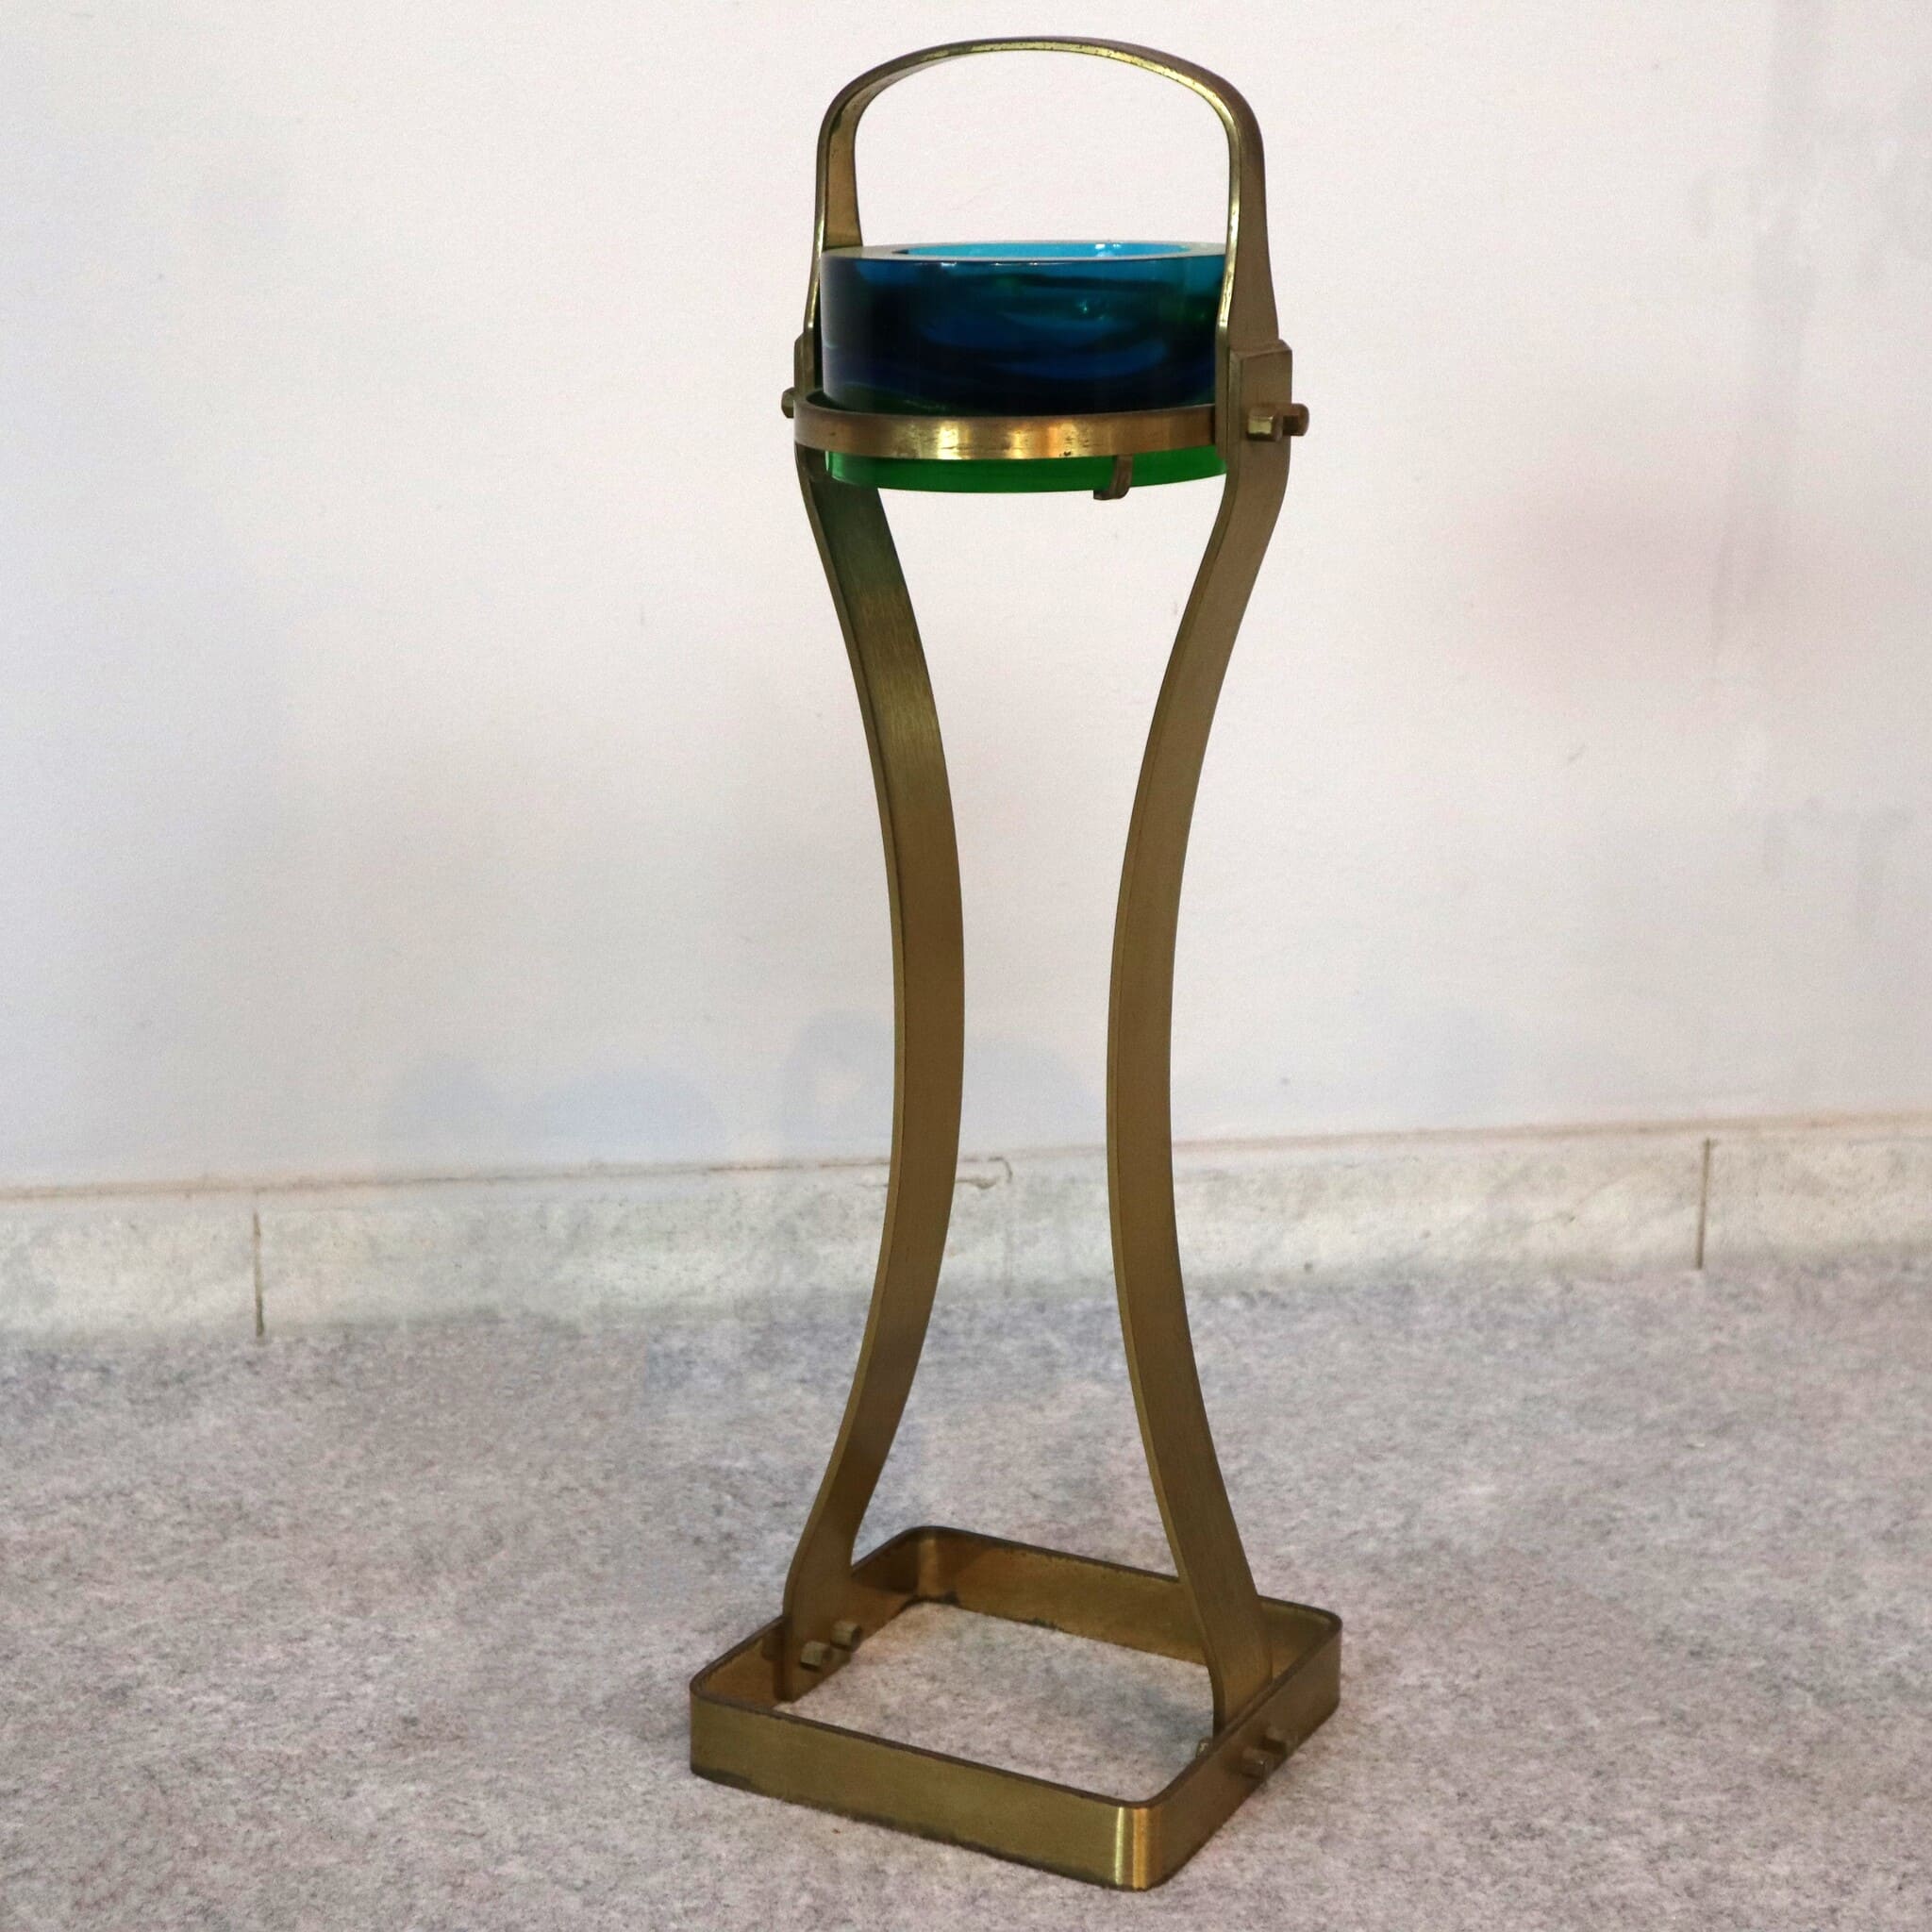 visionidepoca-modern-art-ashtray-entrance-vintage-60s-70s-brass-structure-base-in-murano-glass-green-and-blue-full-view